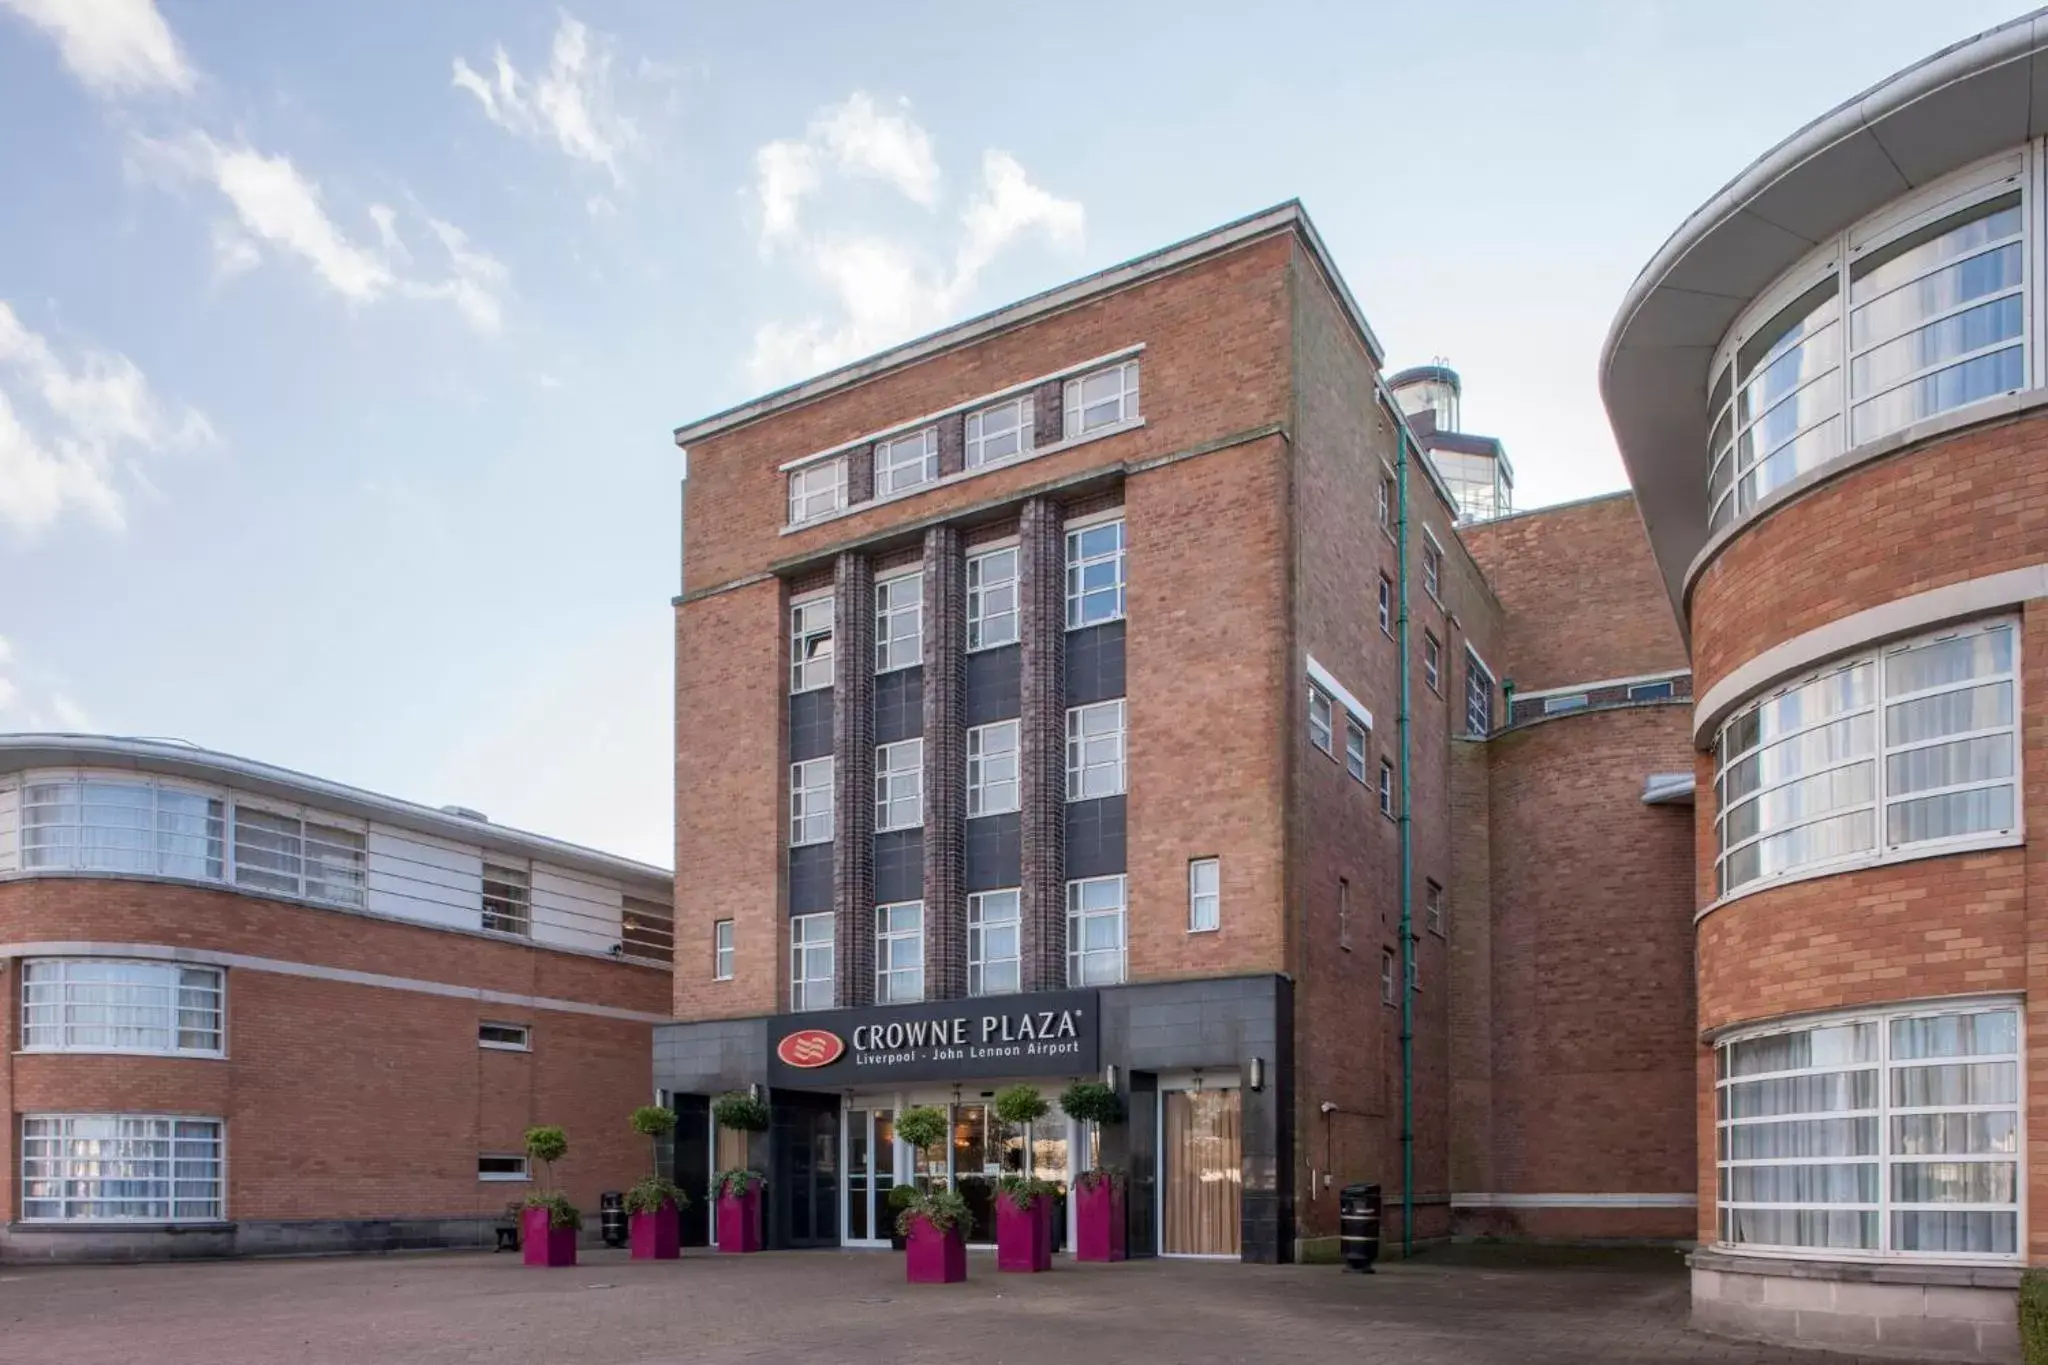 Property Building in Crowne Plaza Liverpool - John Lennon Airport, an IHG Hotel